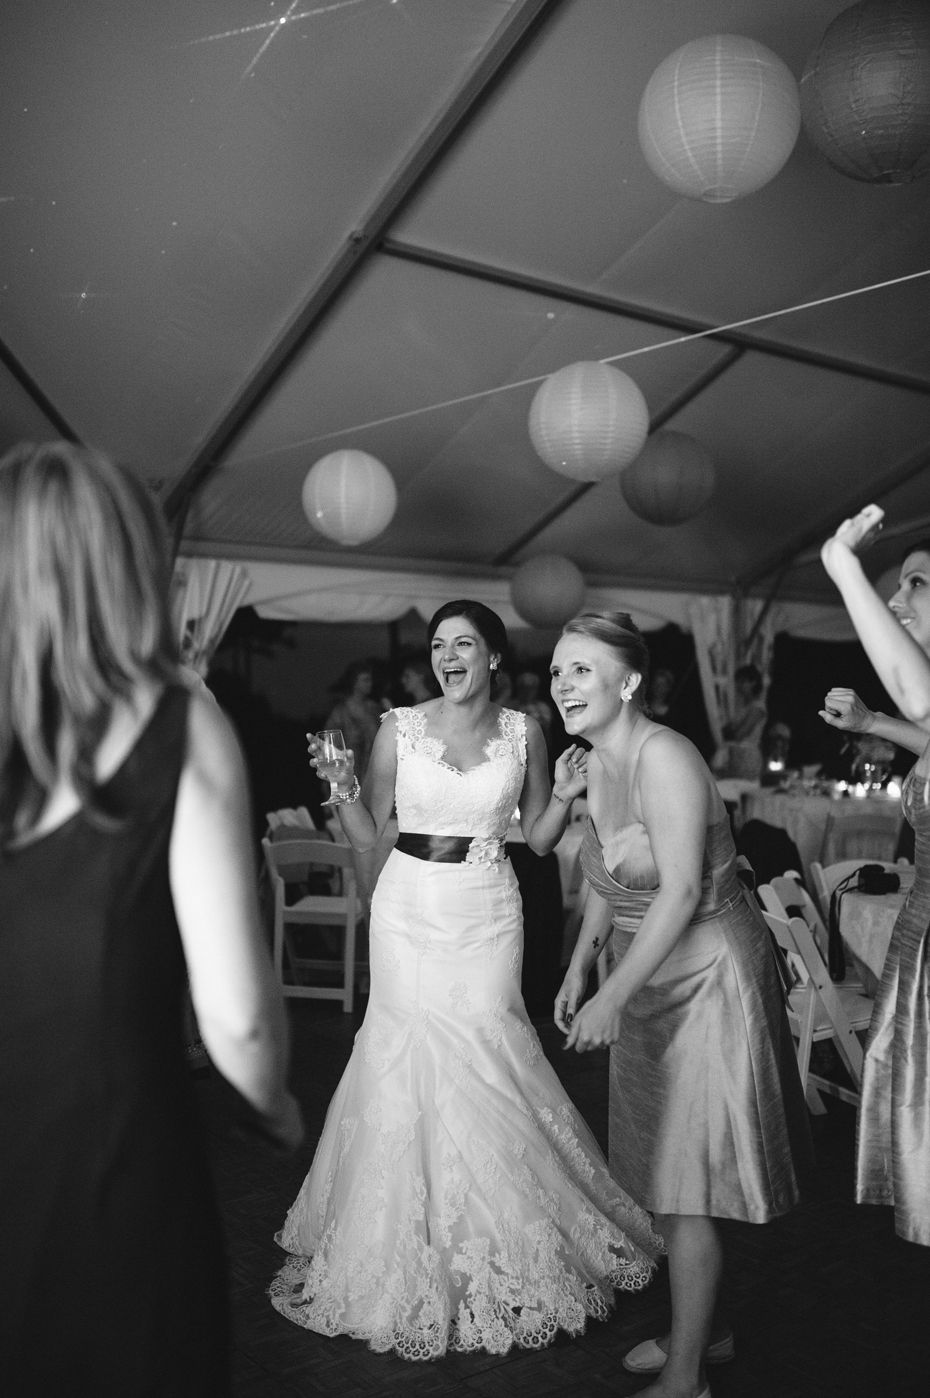 The bride dancing during an outdoor wedding reception at The Inn at Stonecliffe on Mackinac Island by Ann Arbor Wedding Photographer Heather Jowett.